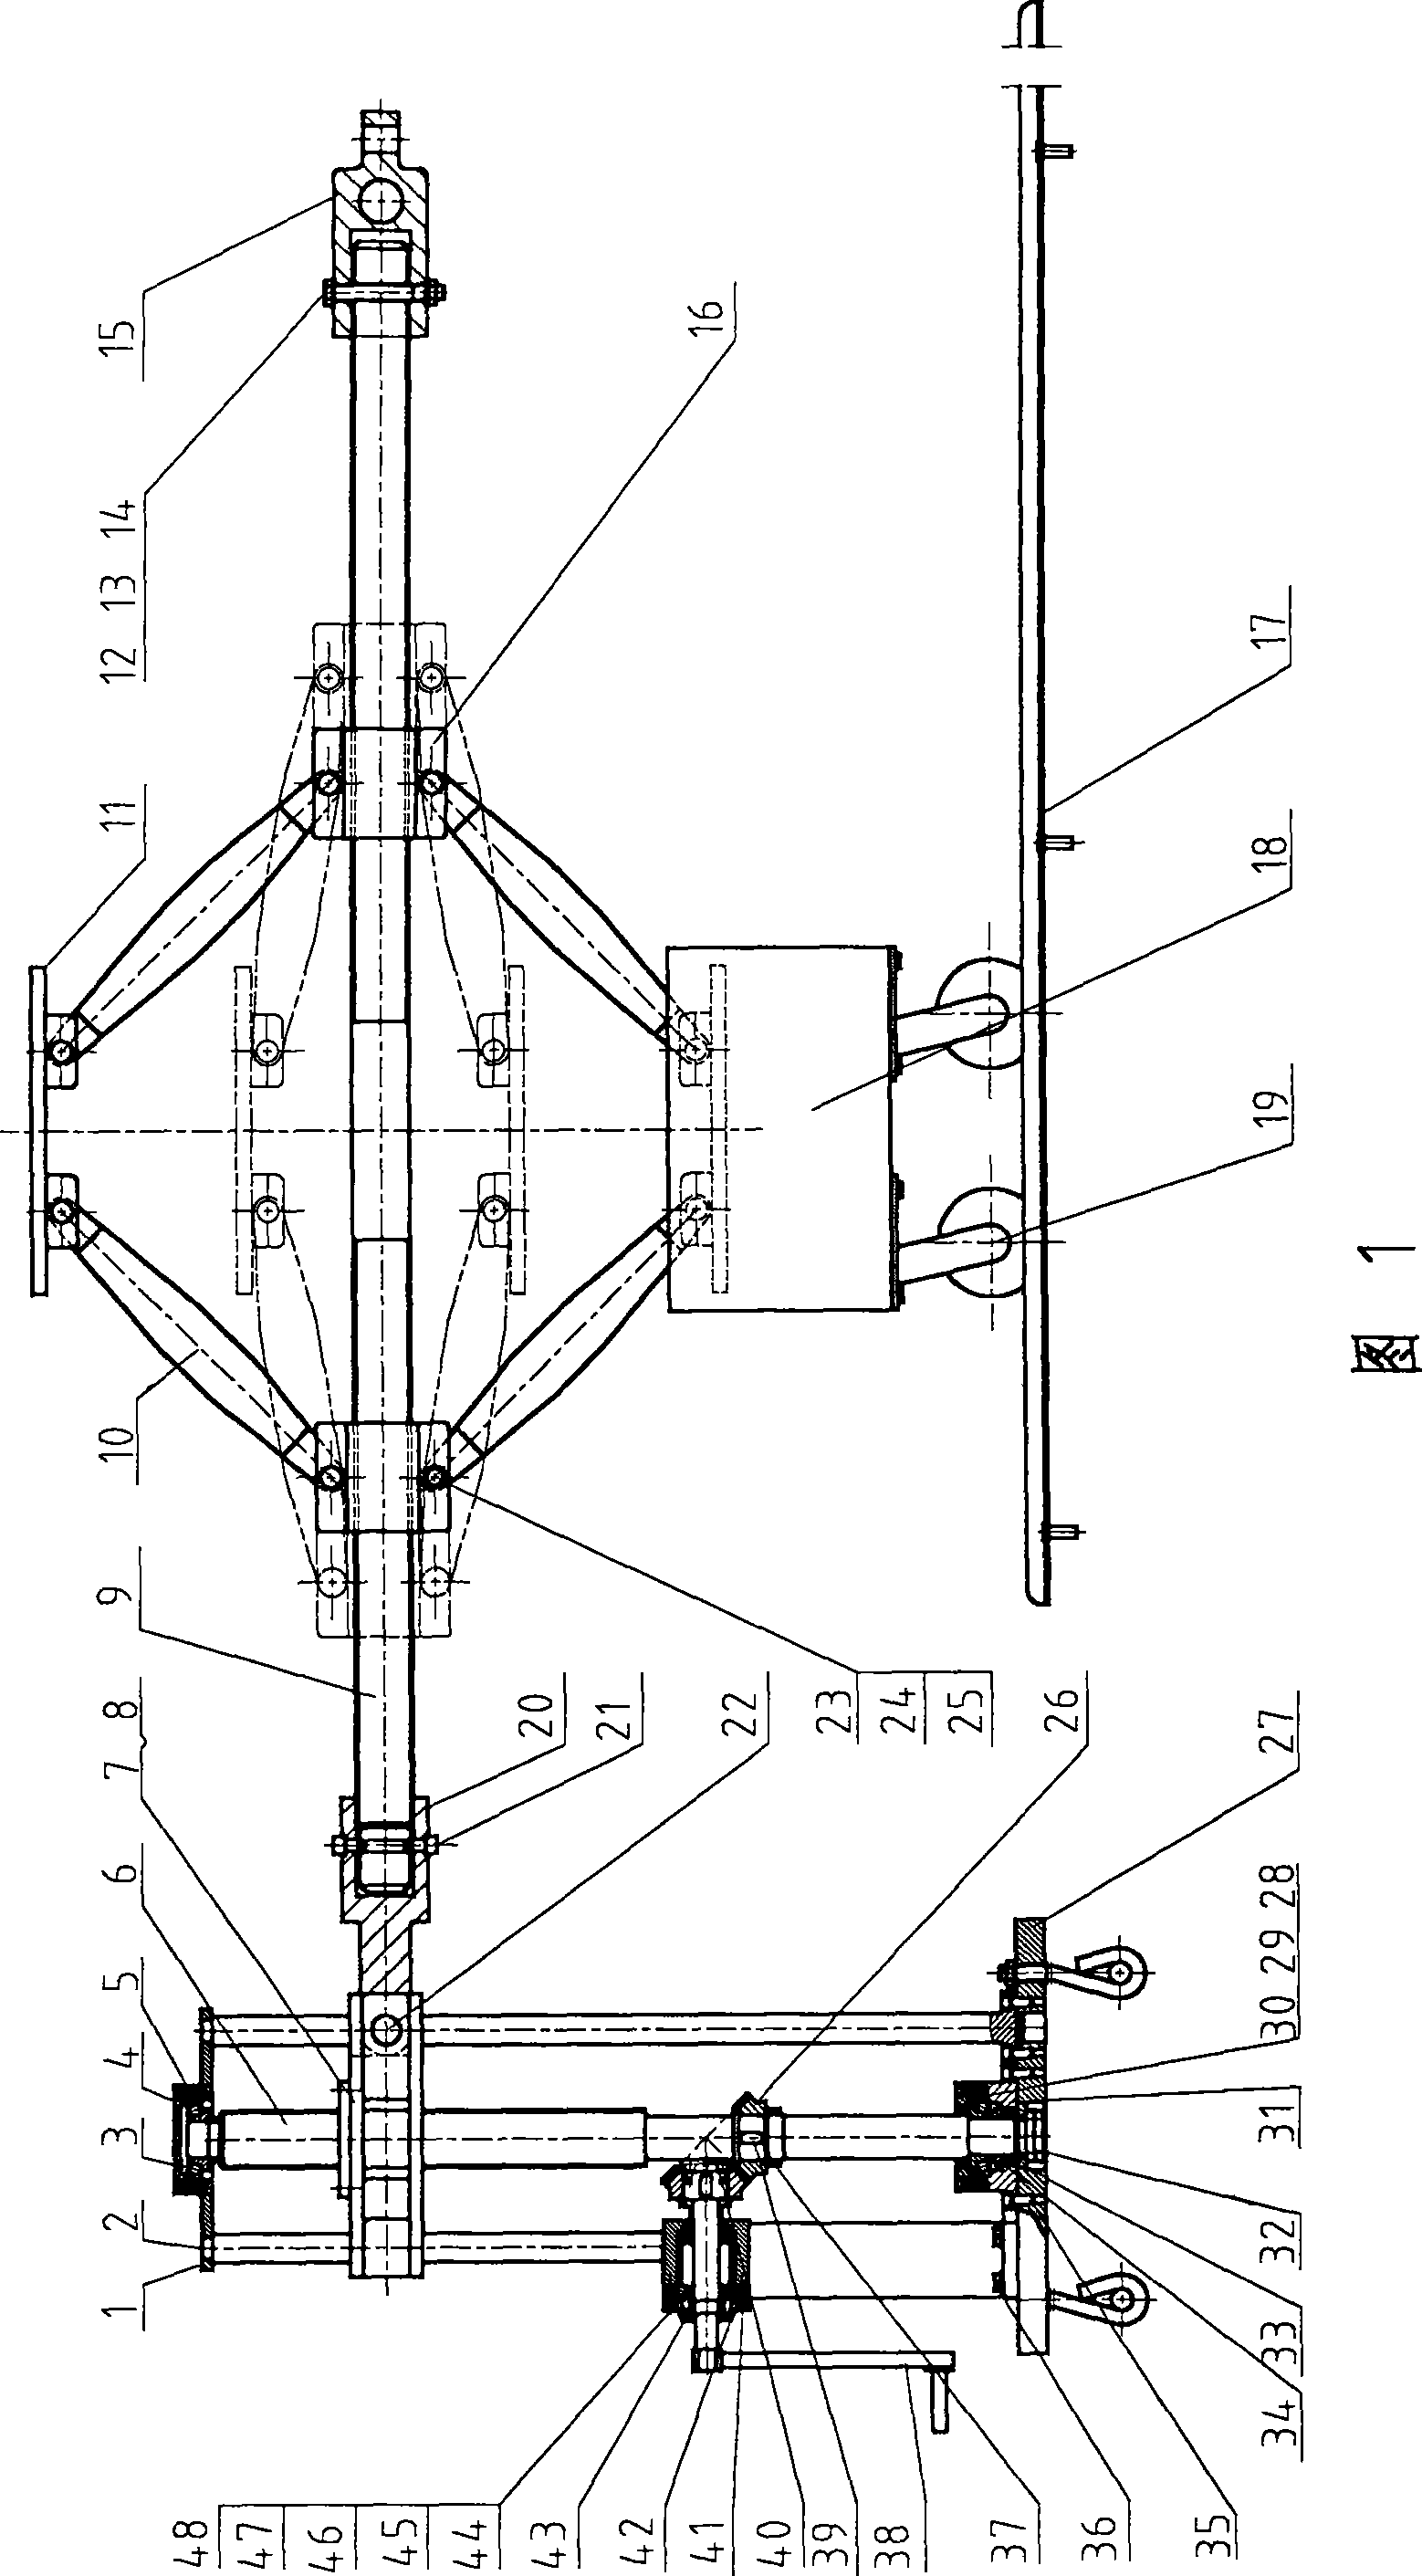 Internal-swelling type stator hoisting special purpose tools